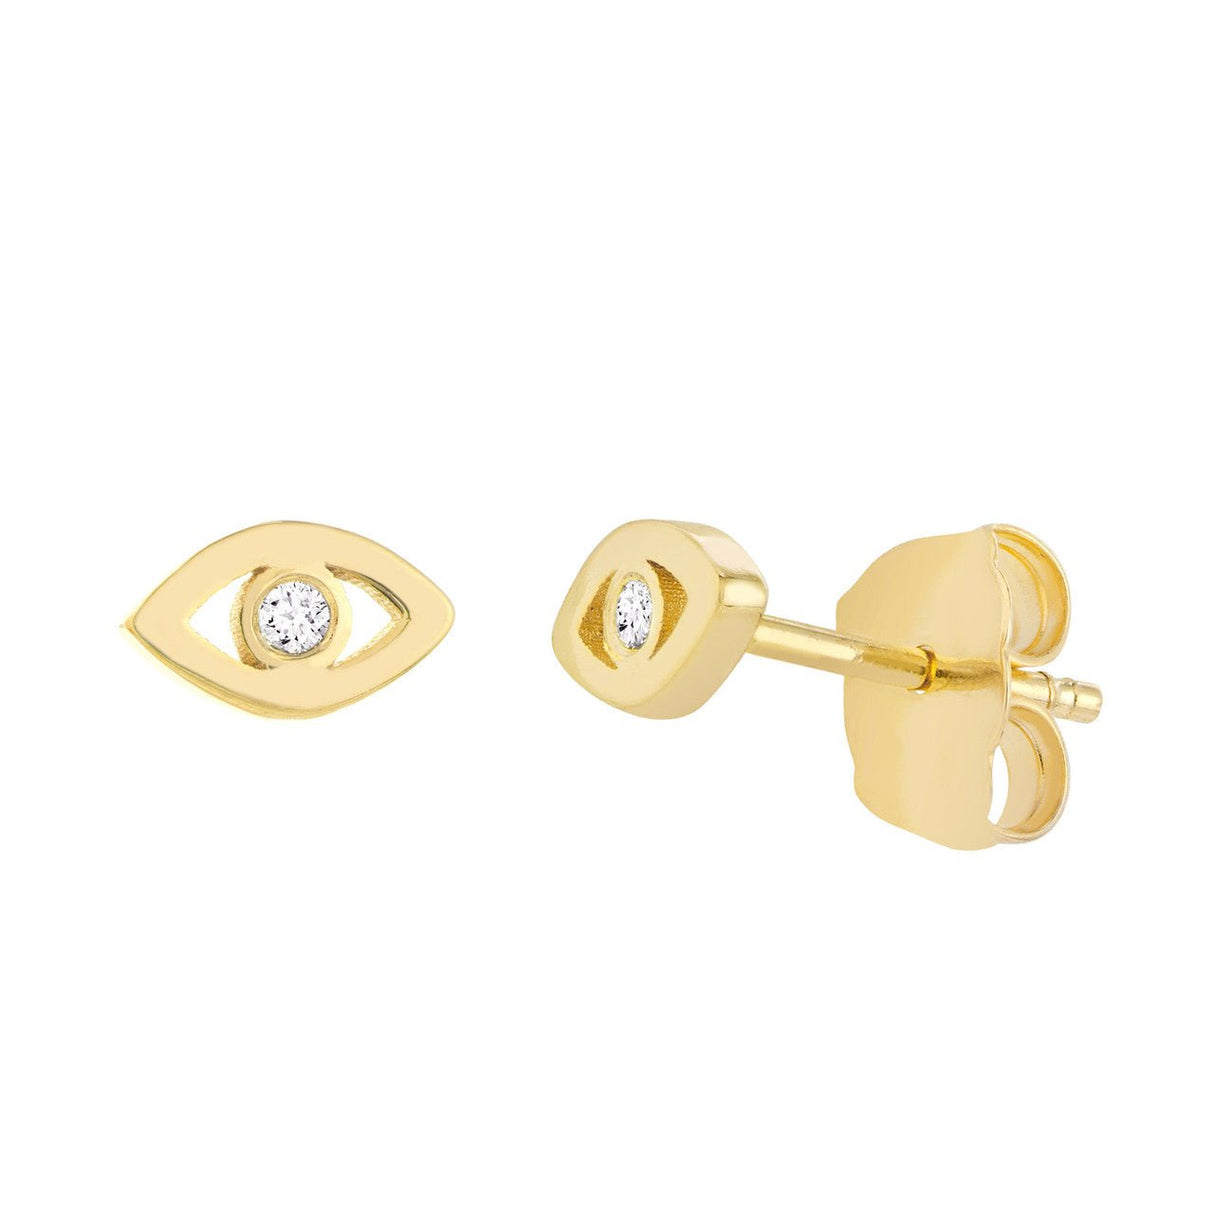 Discover the perfect gift for her with the Diamond Origin 14K Gold Earrings 2023 Collection! Adorned with two shining 2pts diamonds and a gorgeous open mini evil eye motif, these earrings make a luxurious statement. A timeless representation of love and appreciation, they're perfect for any birthday or special occasion. Experience the modern elegance of these exquisite diamond earrings and make her day one to remember!  gift for her, birthday gift, gold gift, love gift,